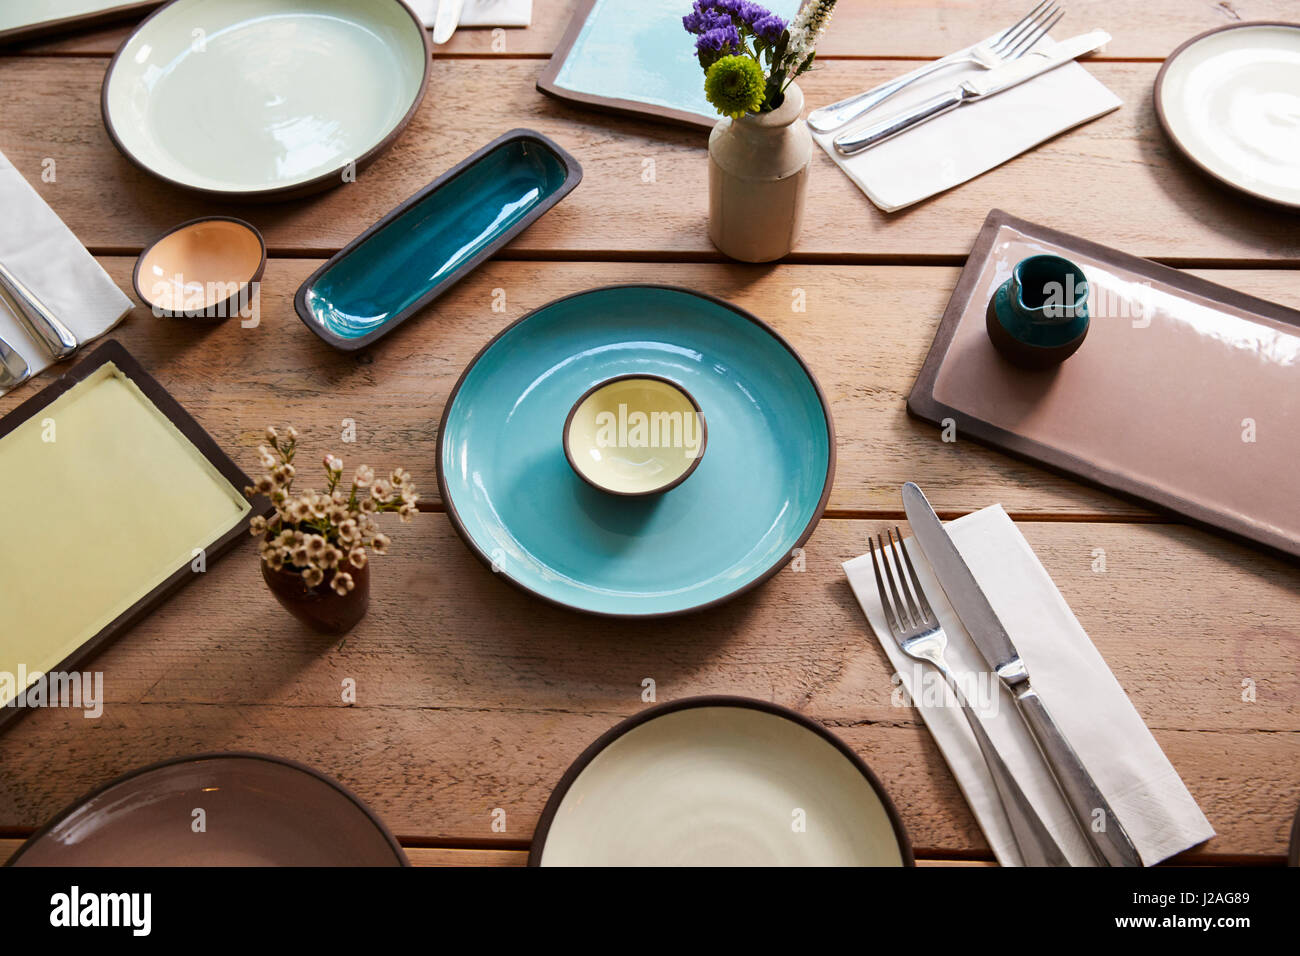 High angle view of earthenware and cutlery on a table Stock Photo